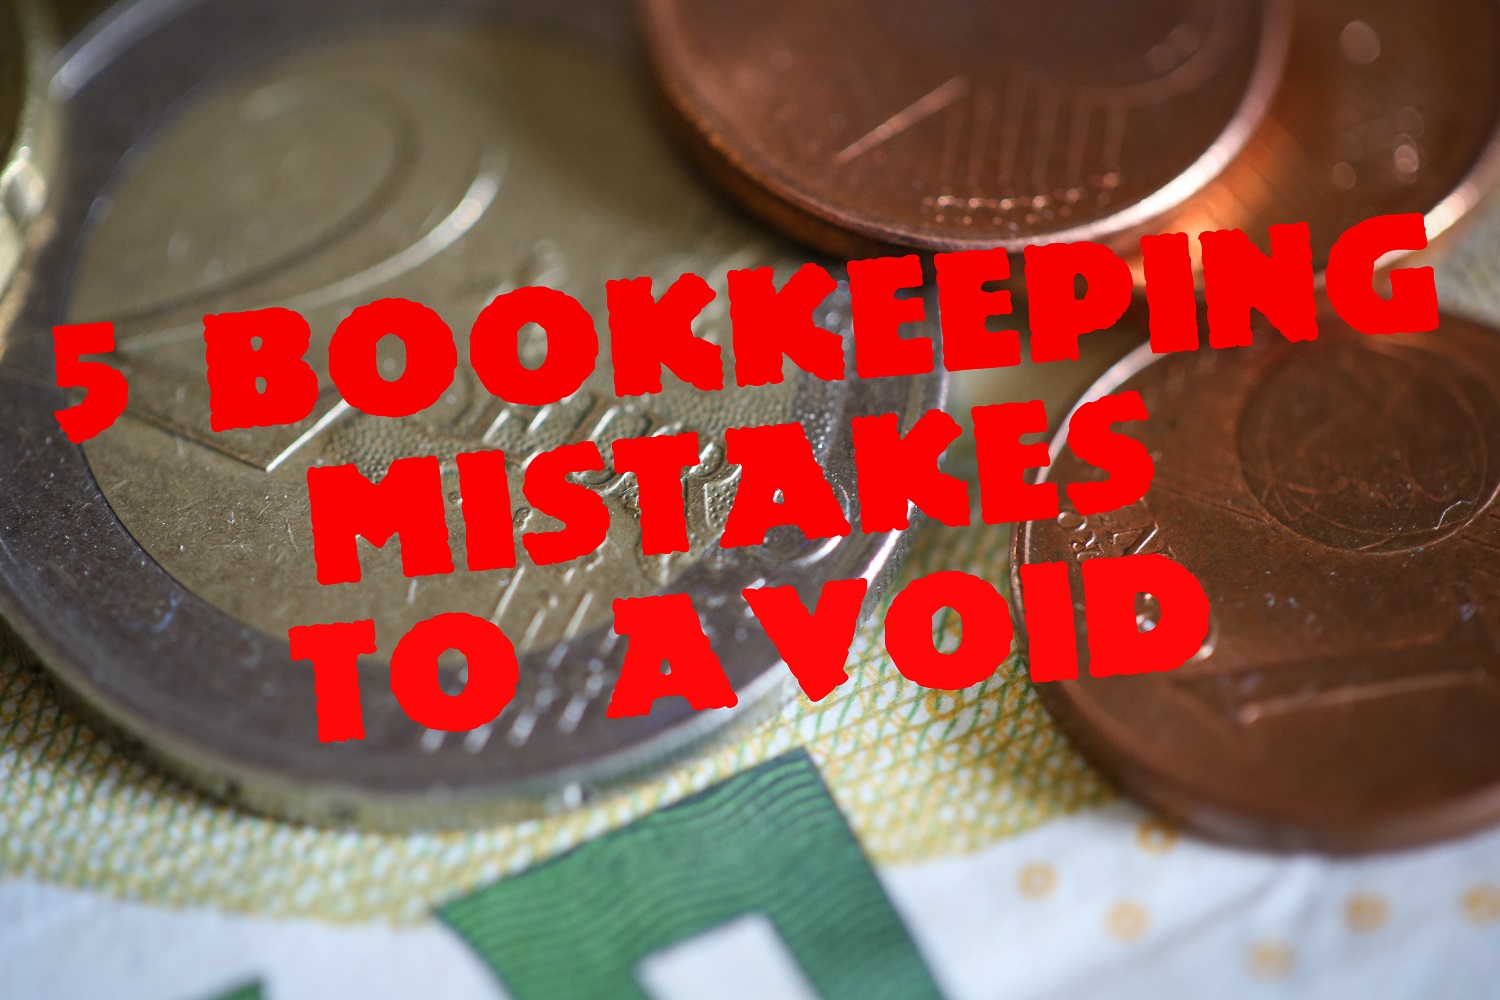 5 Bookkeeping mistakes your business should avoid